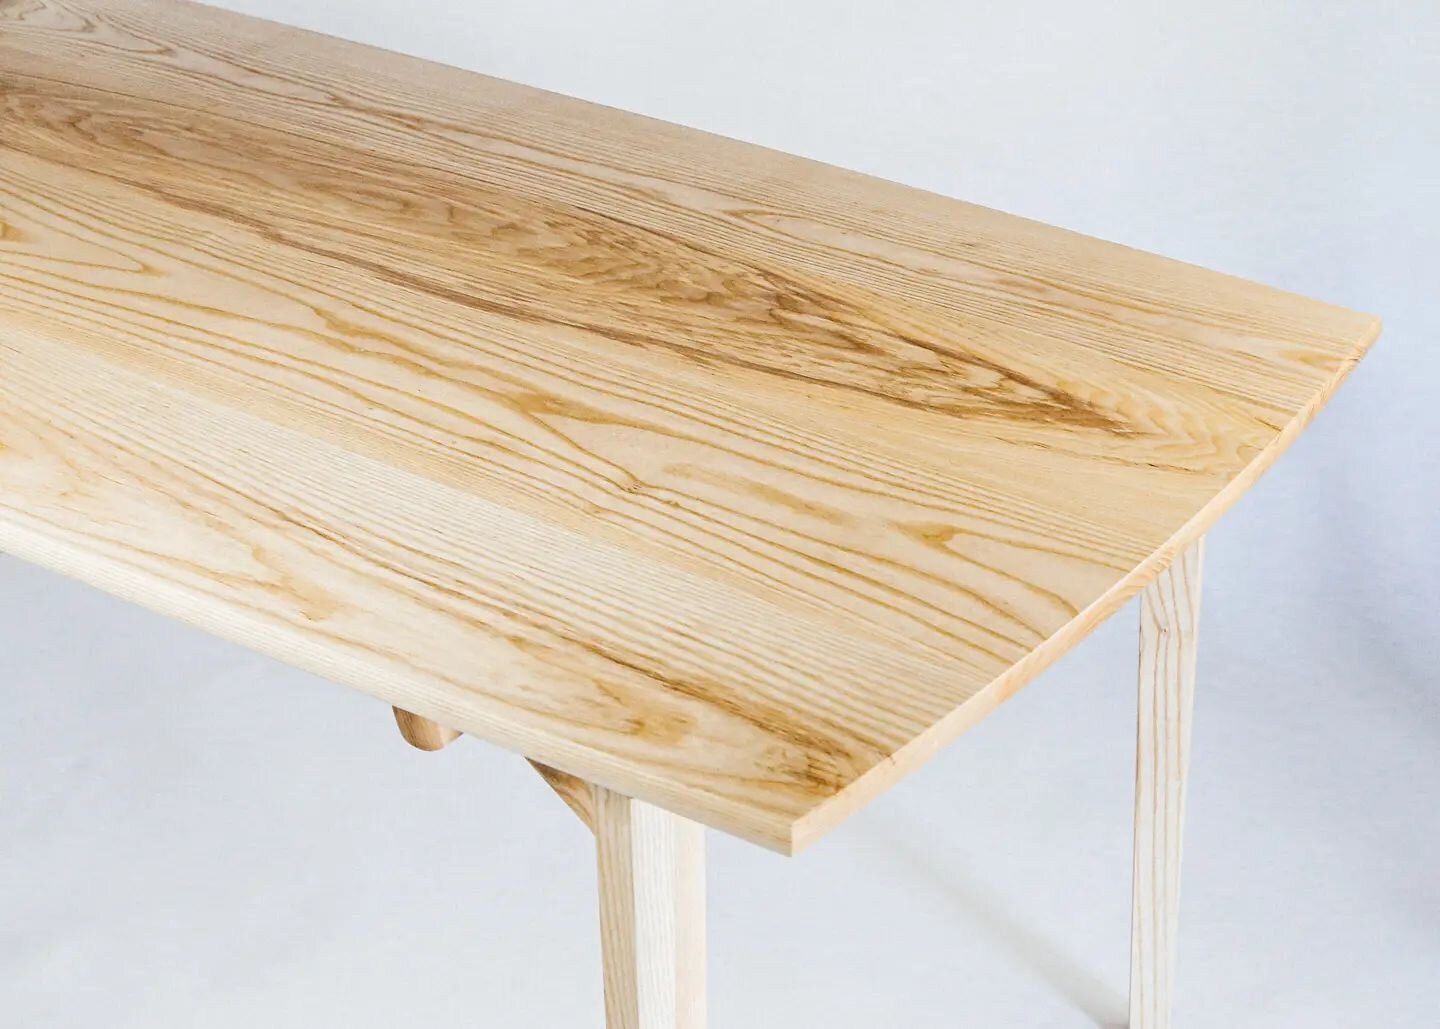 As much as I like how this Ash table came out, I'd love to see it in walnut
...⁠
#customtable  #interiordesign  #customfurniture  #epoxyresin  #woodworking  #epoxy  #interiors  #handmade  #coffeetable  #table #epoxytable  #instagood  #wood  #woodtabl